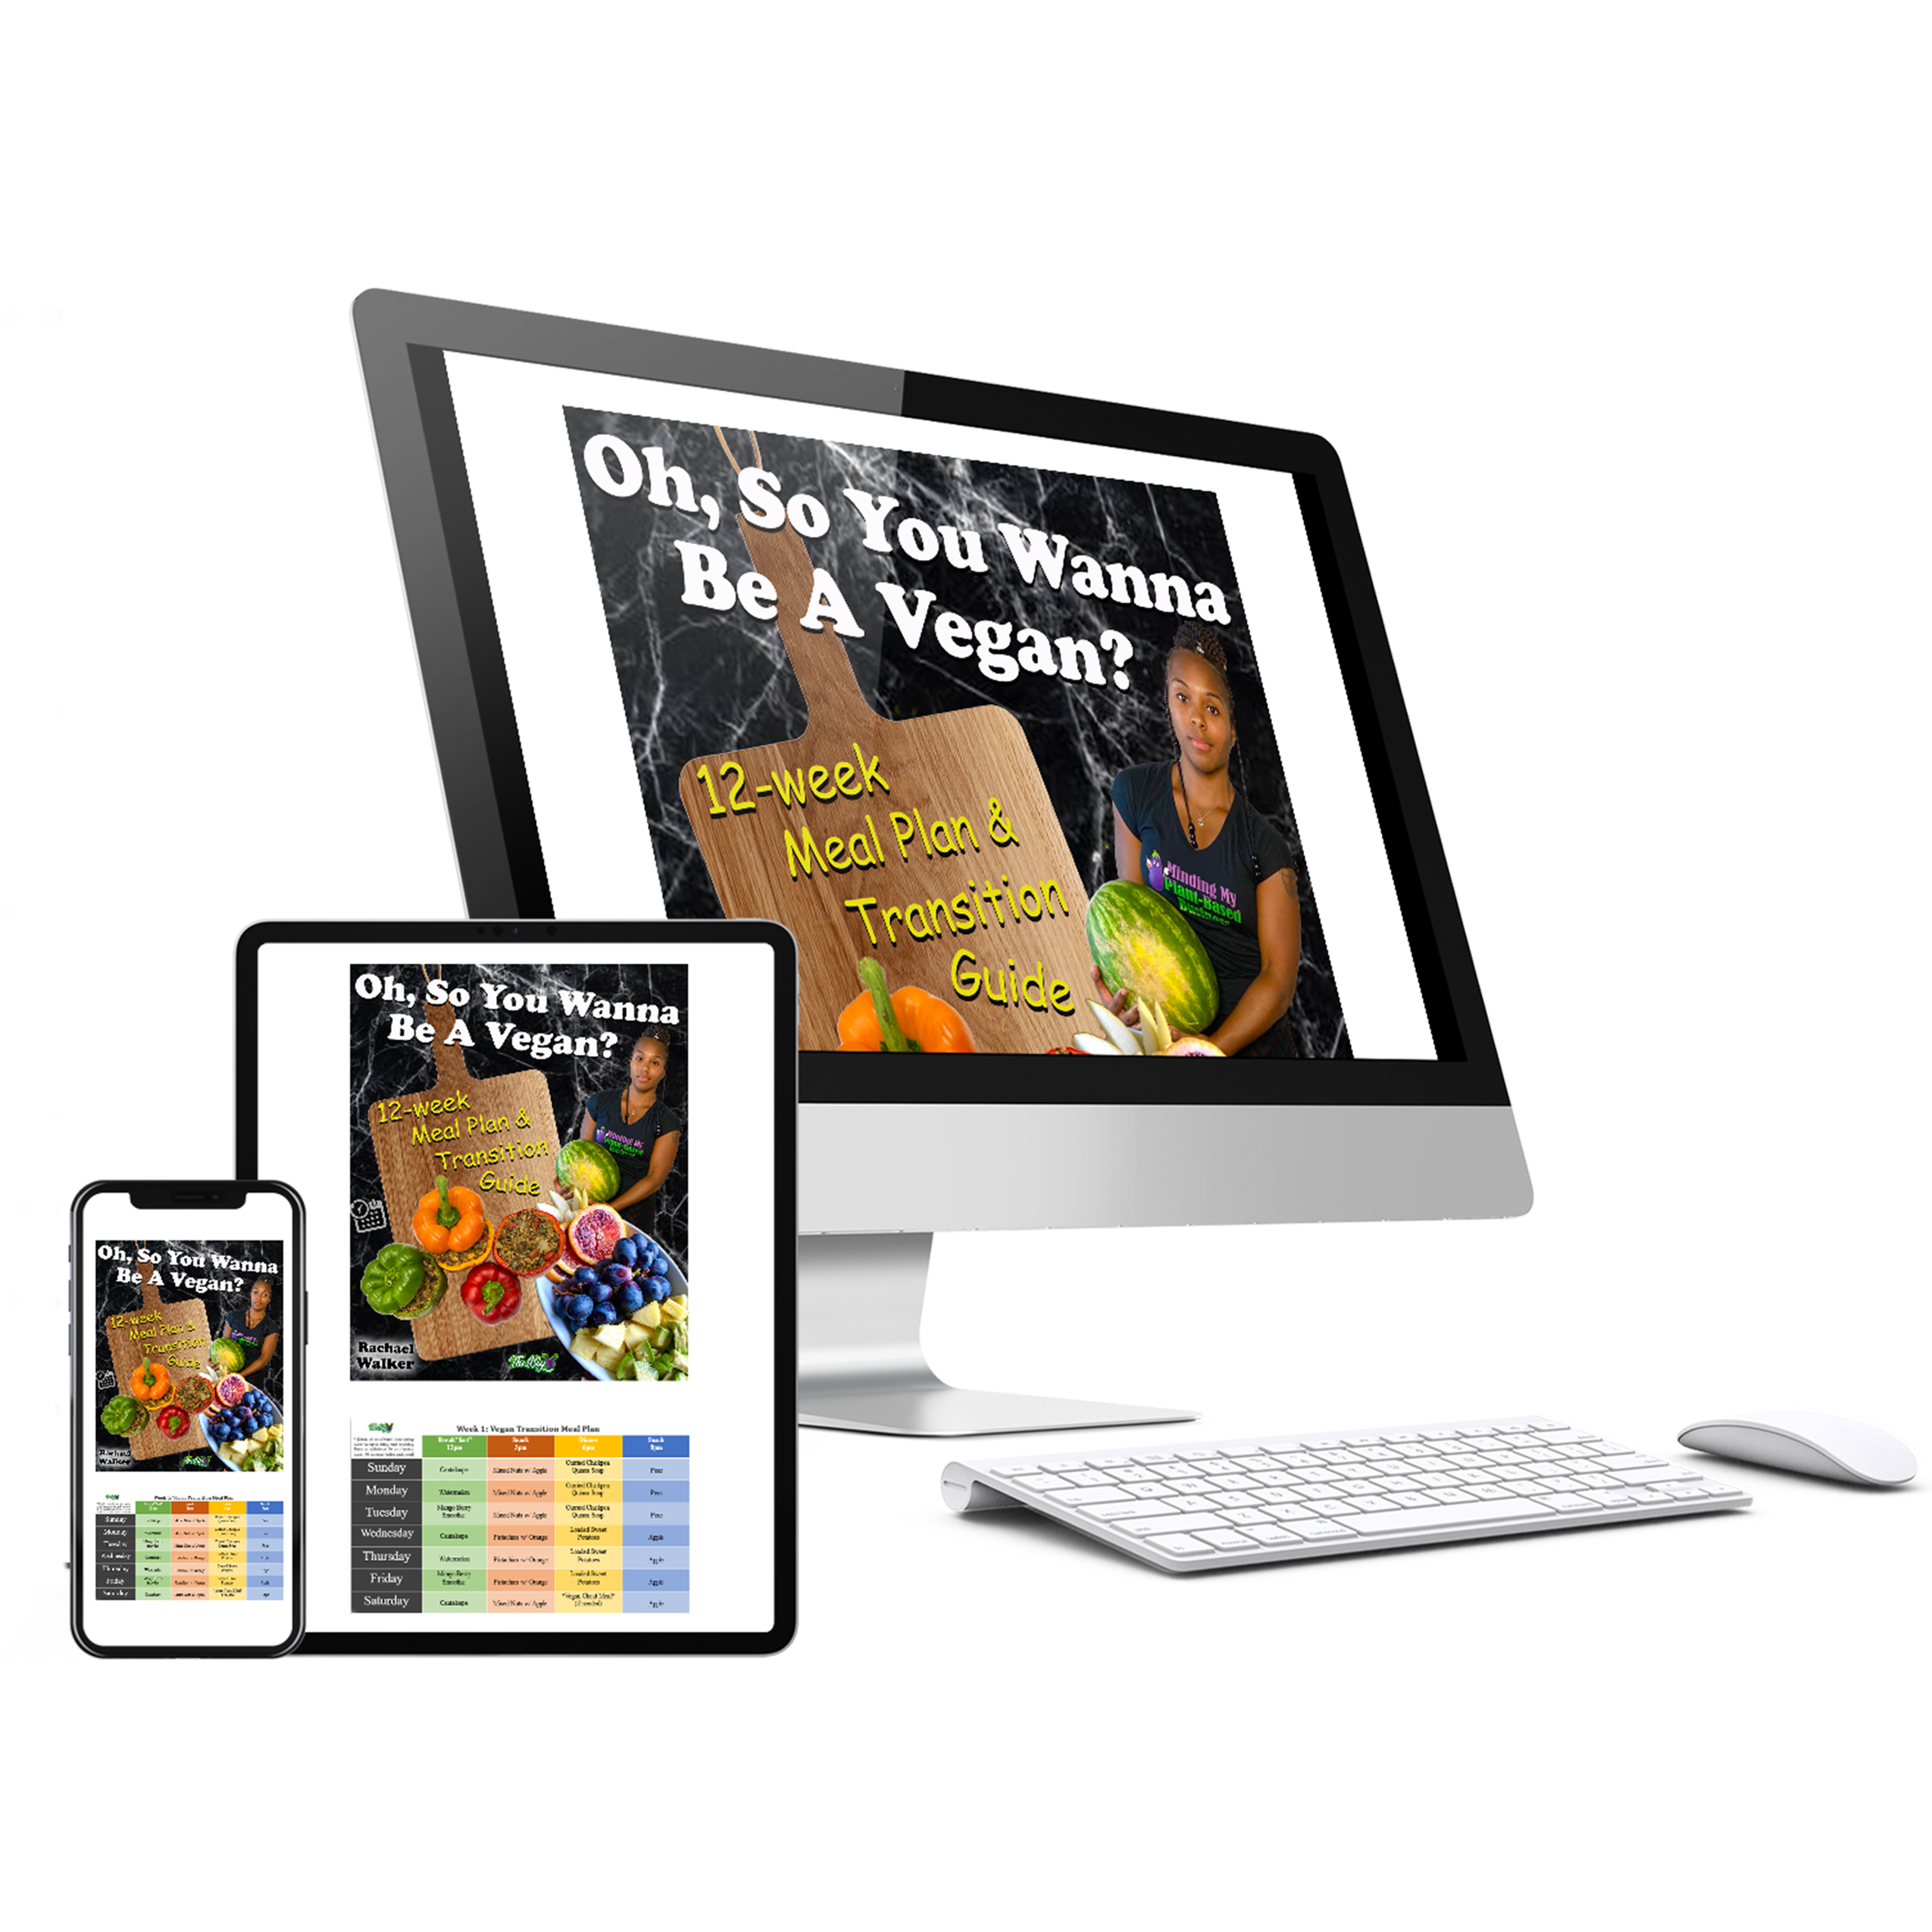 (E-Book) Oh, So You Wanna Be A Vegan? {12-Week Meal Plan & Transition